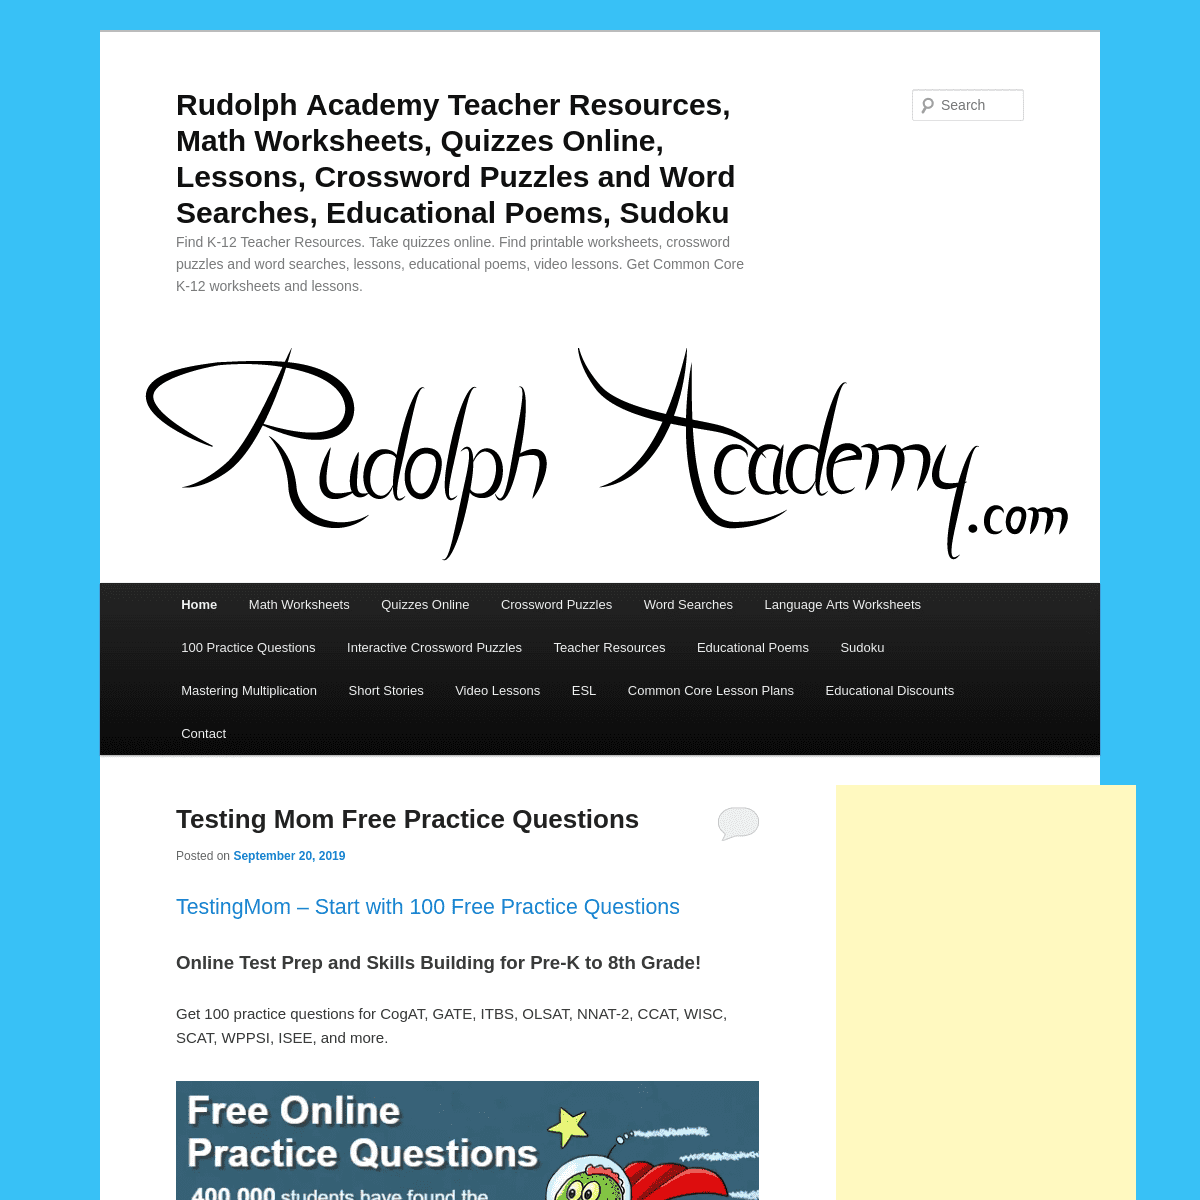 A complete backup of rudolphacademy.com